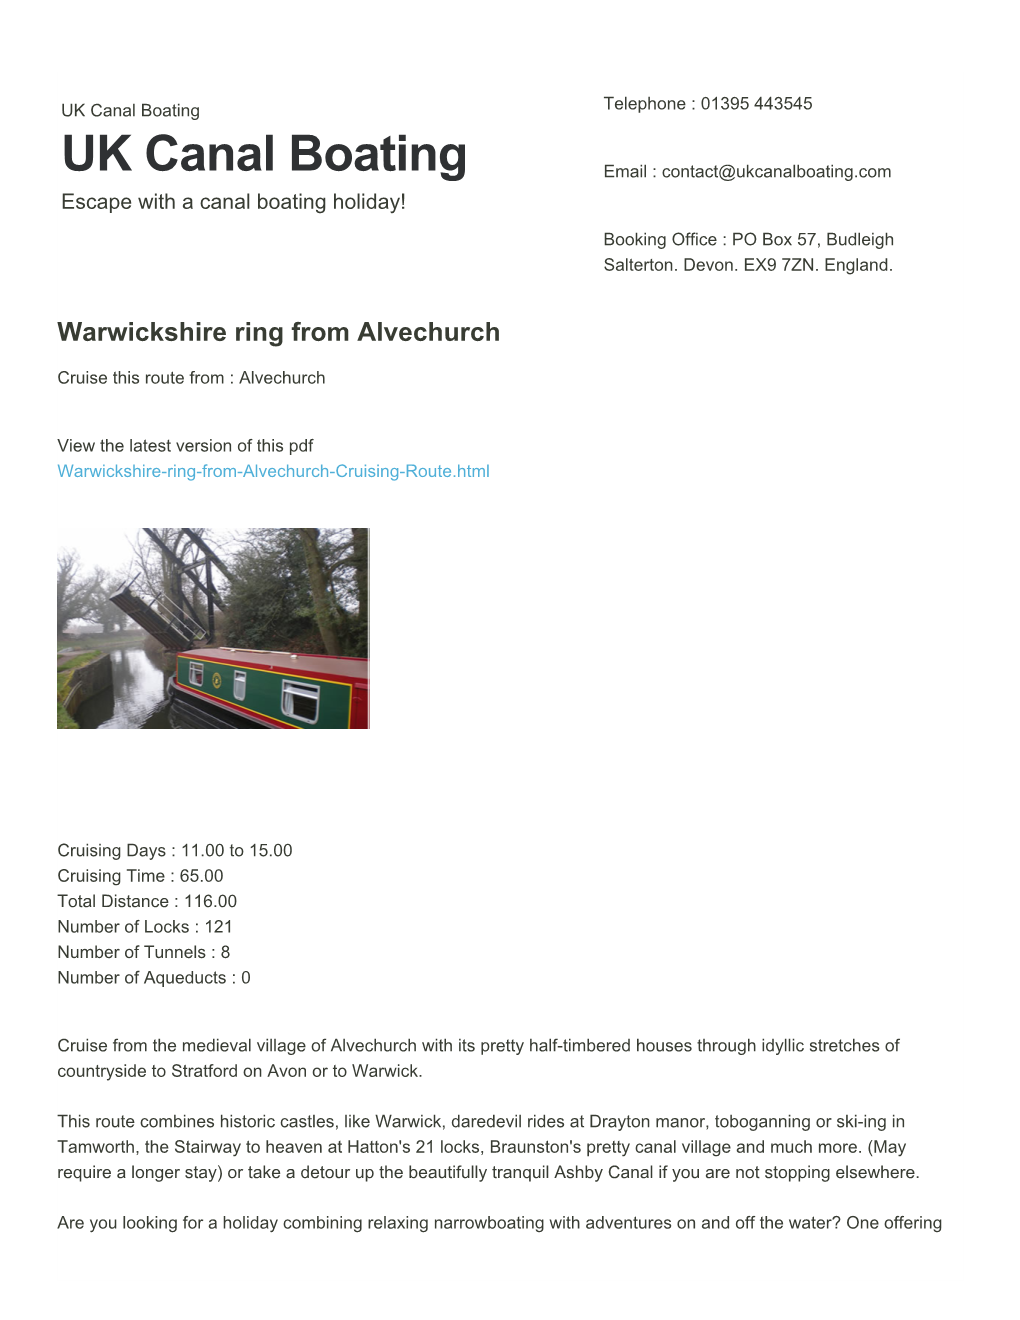 Warwickshire Ring from Alvechurch | UK Canal Boating